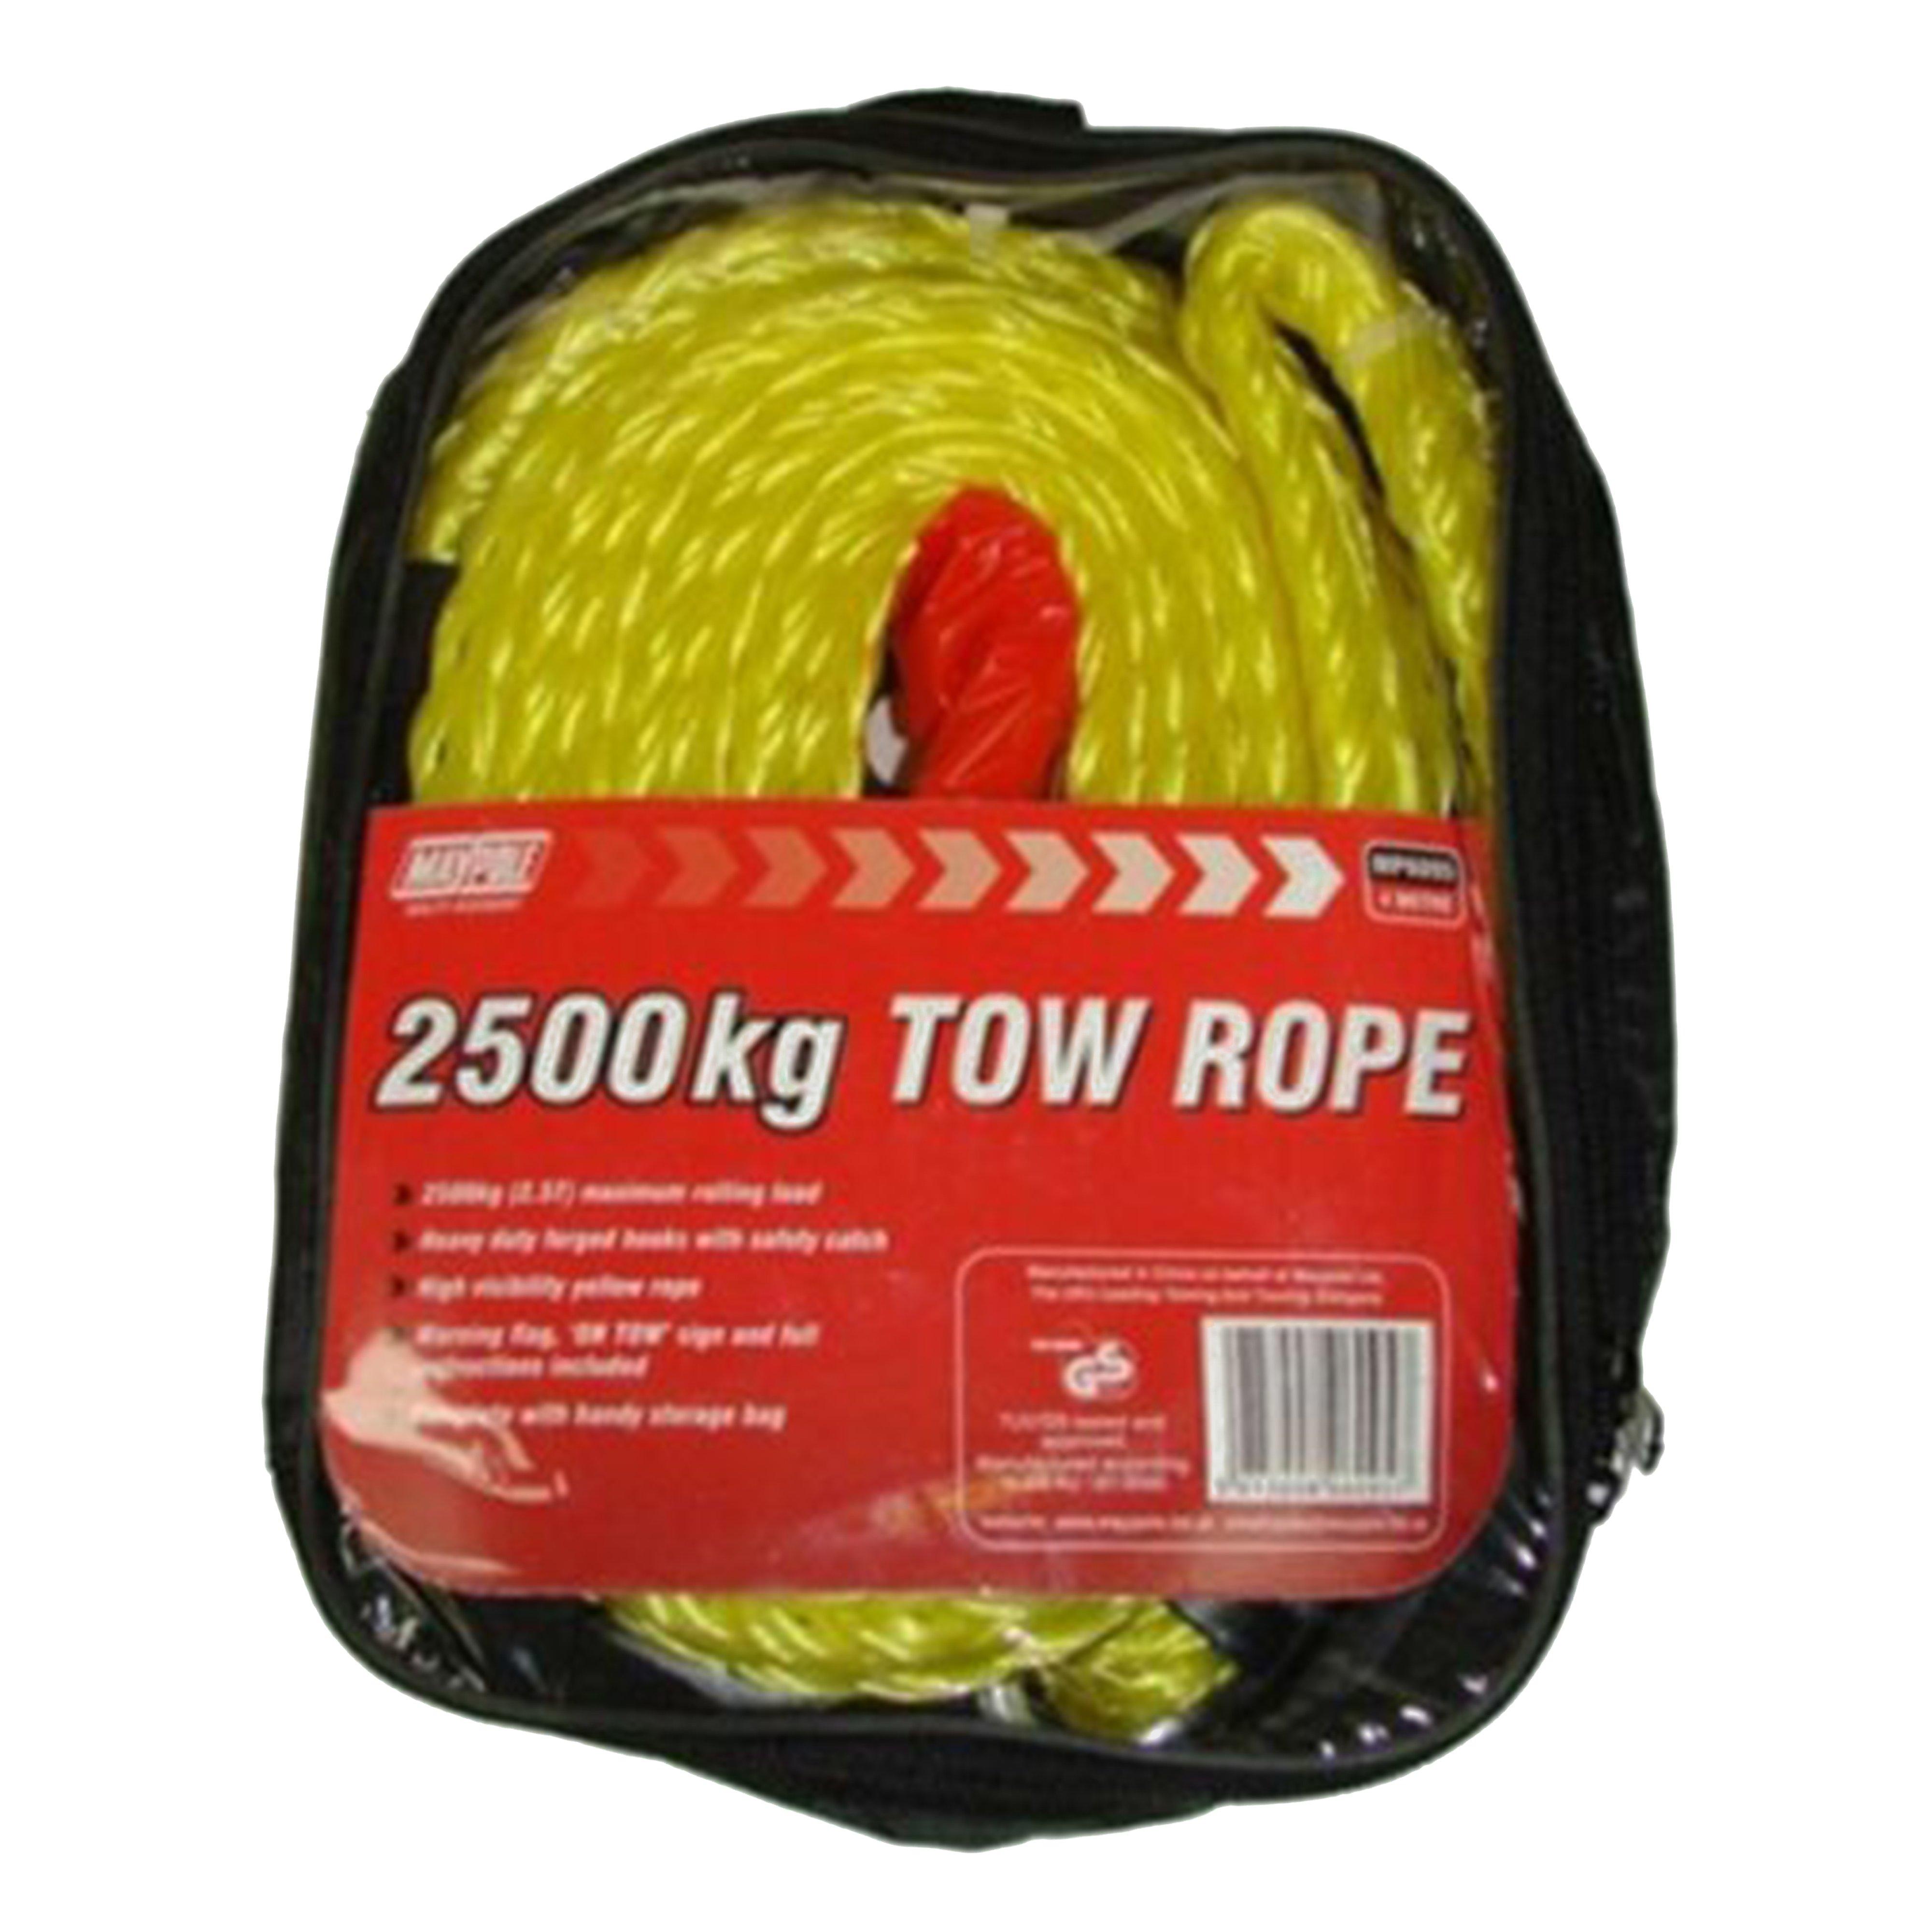 Maypole 3.5m X 2500kg Tow Rope Review